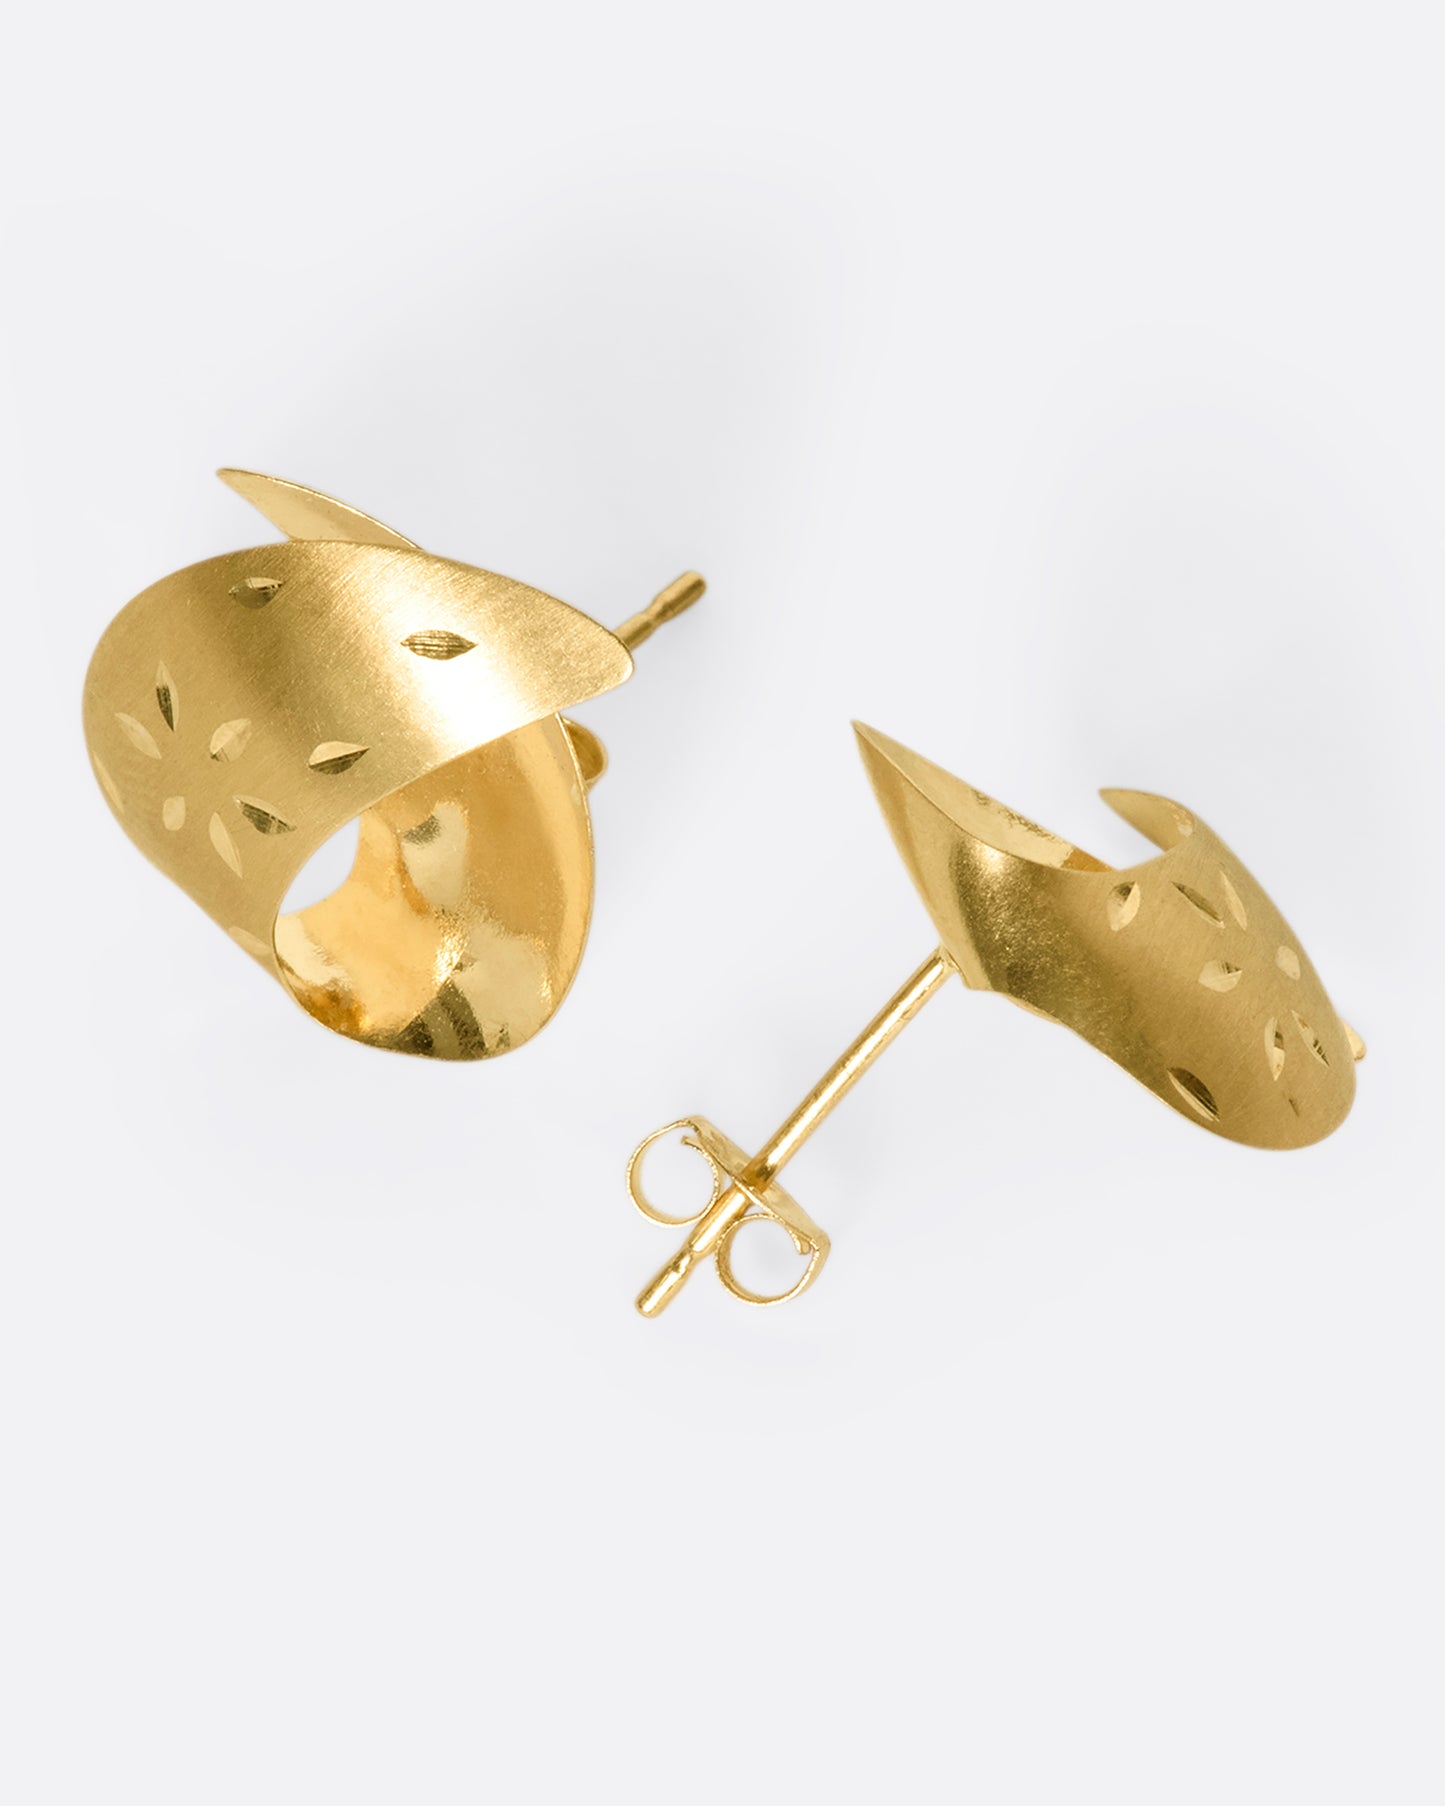 These vintage lightweight, folded studs are made of both matte and polished 14K gold. They're engraved with floral details that pick up light as you move.